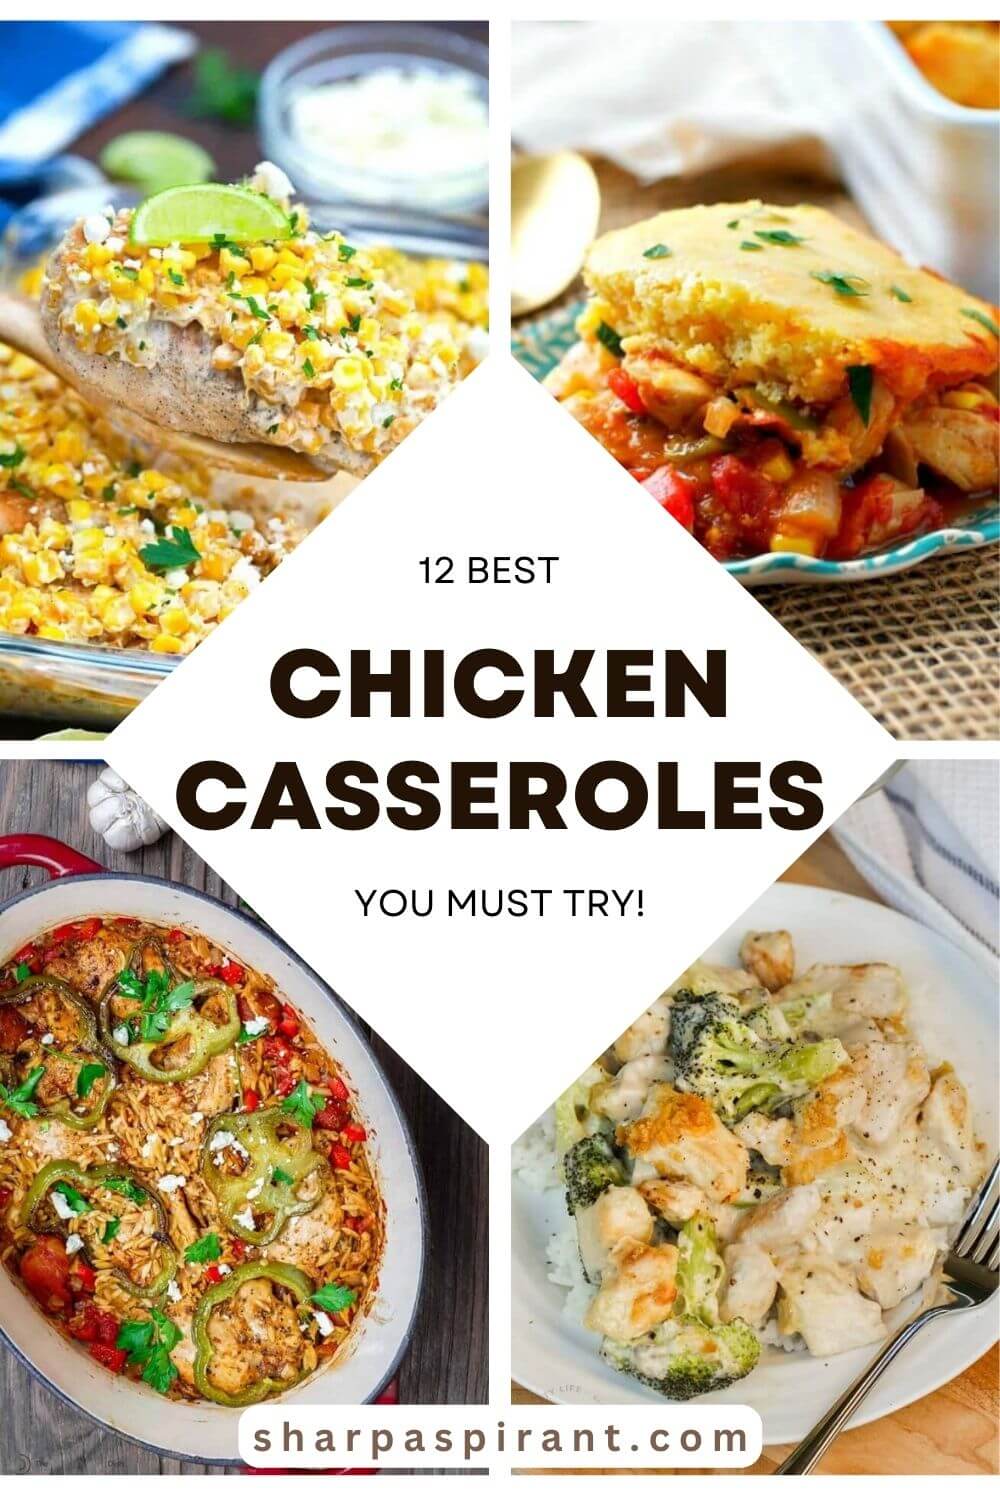 These chicken casserole recipes are a guaranteed bet when it comes to dependable options in the culinary realm. They're straightforward to prepare, appealing to children, and sophisticated enough for upscale dinner gatherings.